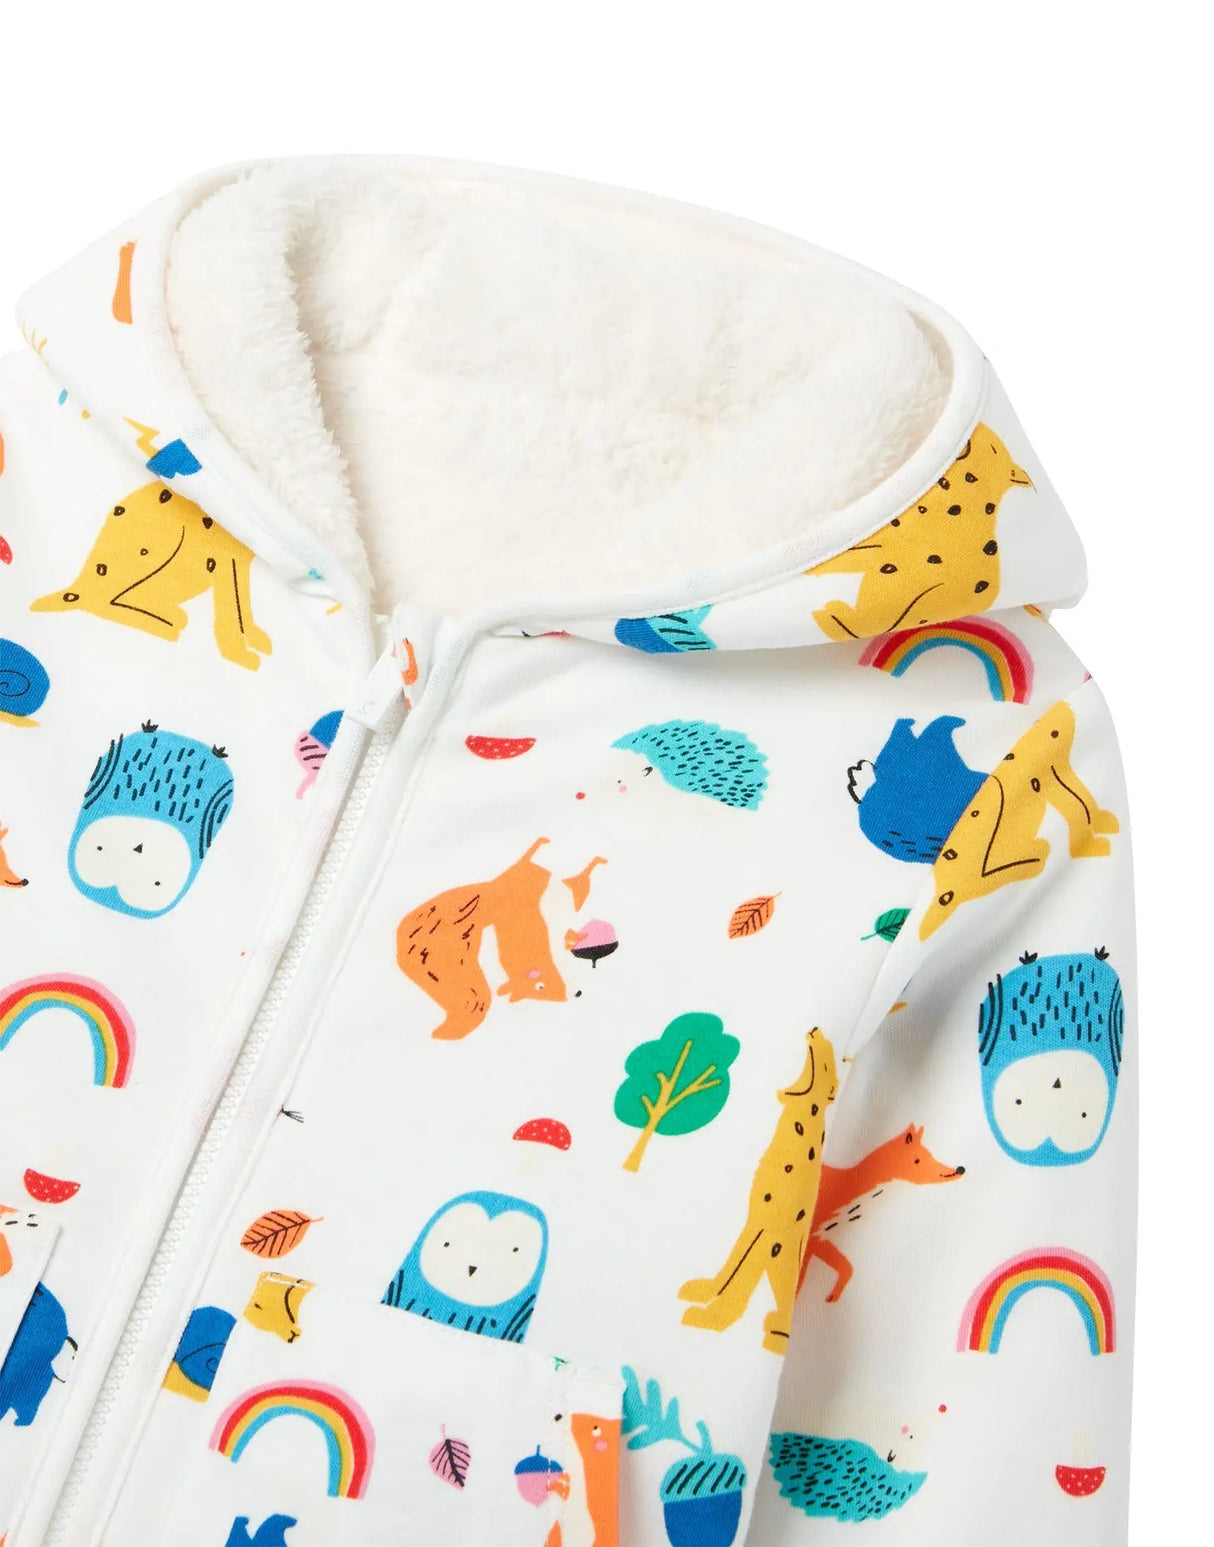 Nursery Cosette Reversible Jacket - Wild White | Joules - Joules